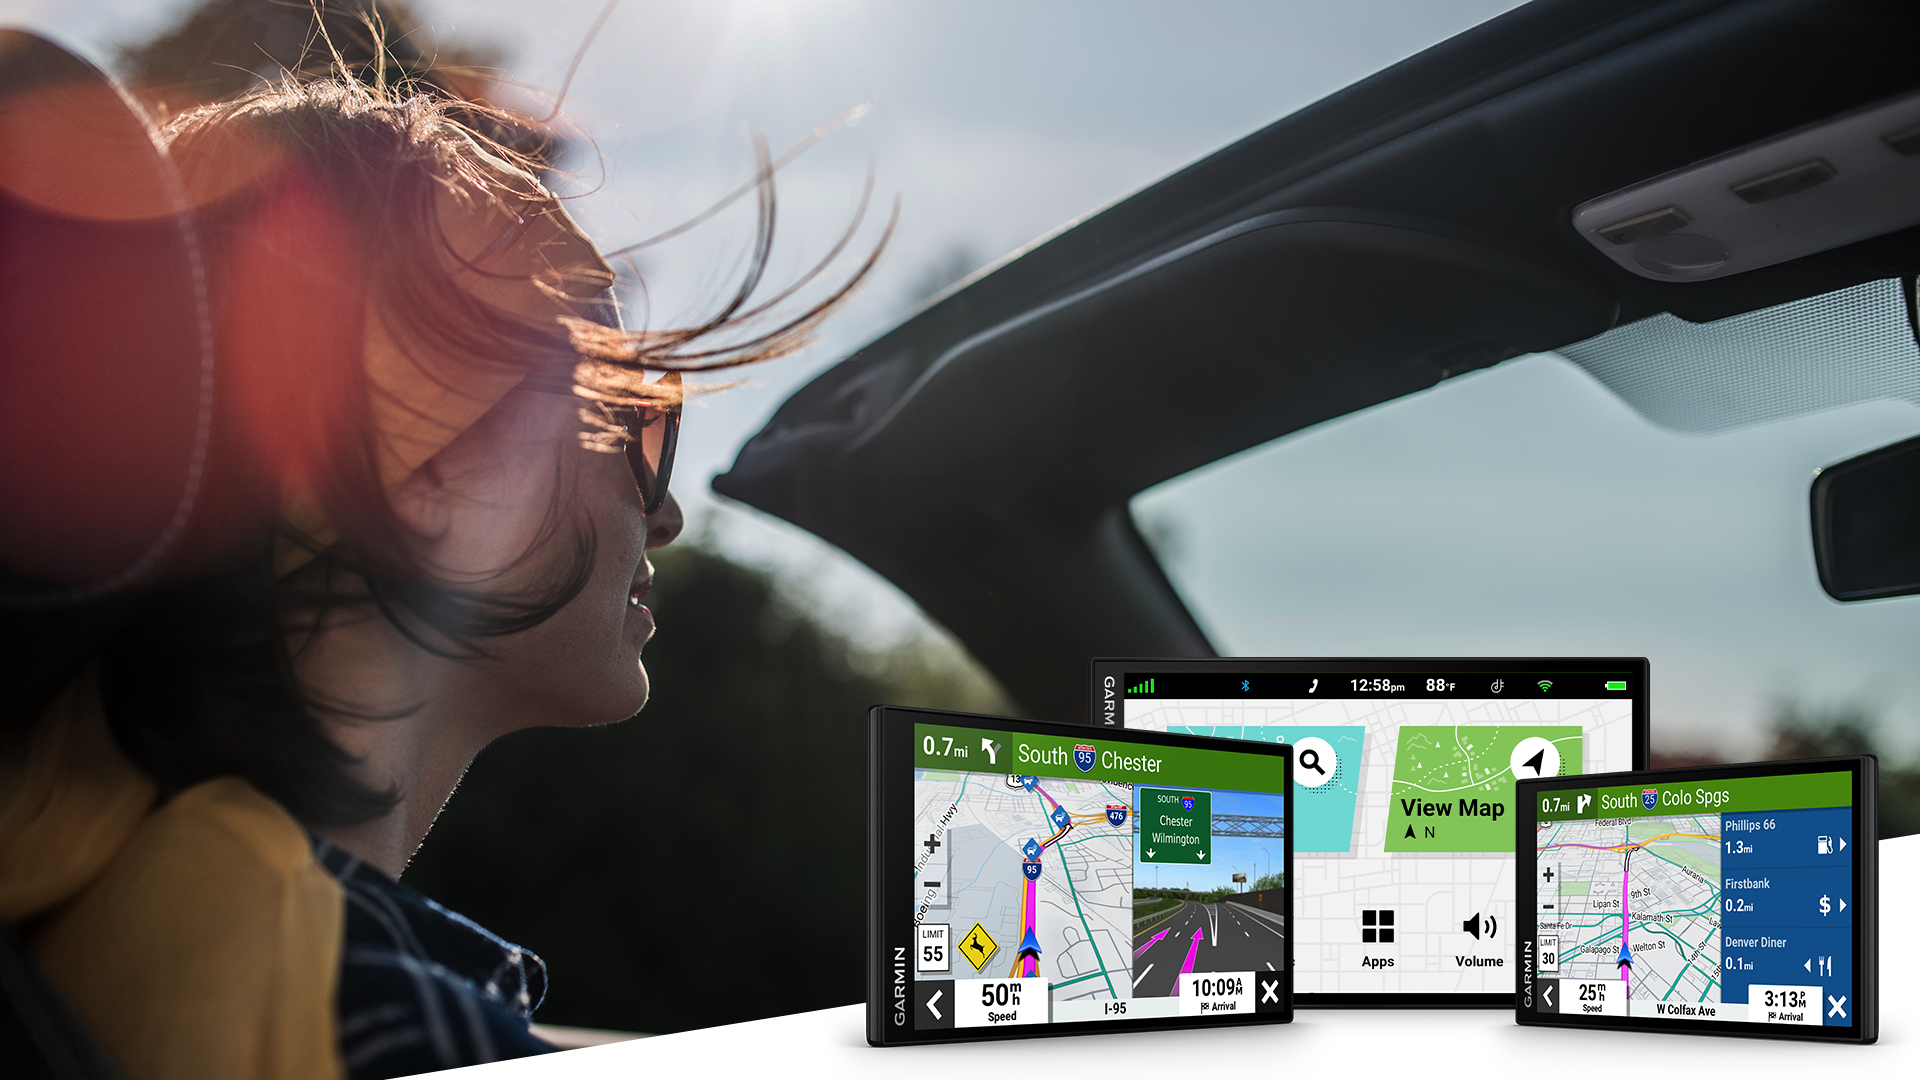 Skygge Tentacle overrasket Garmin announces latest additions to DriveSmart car GPS series.